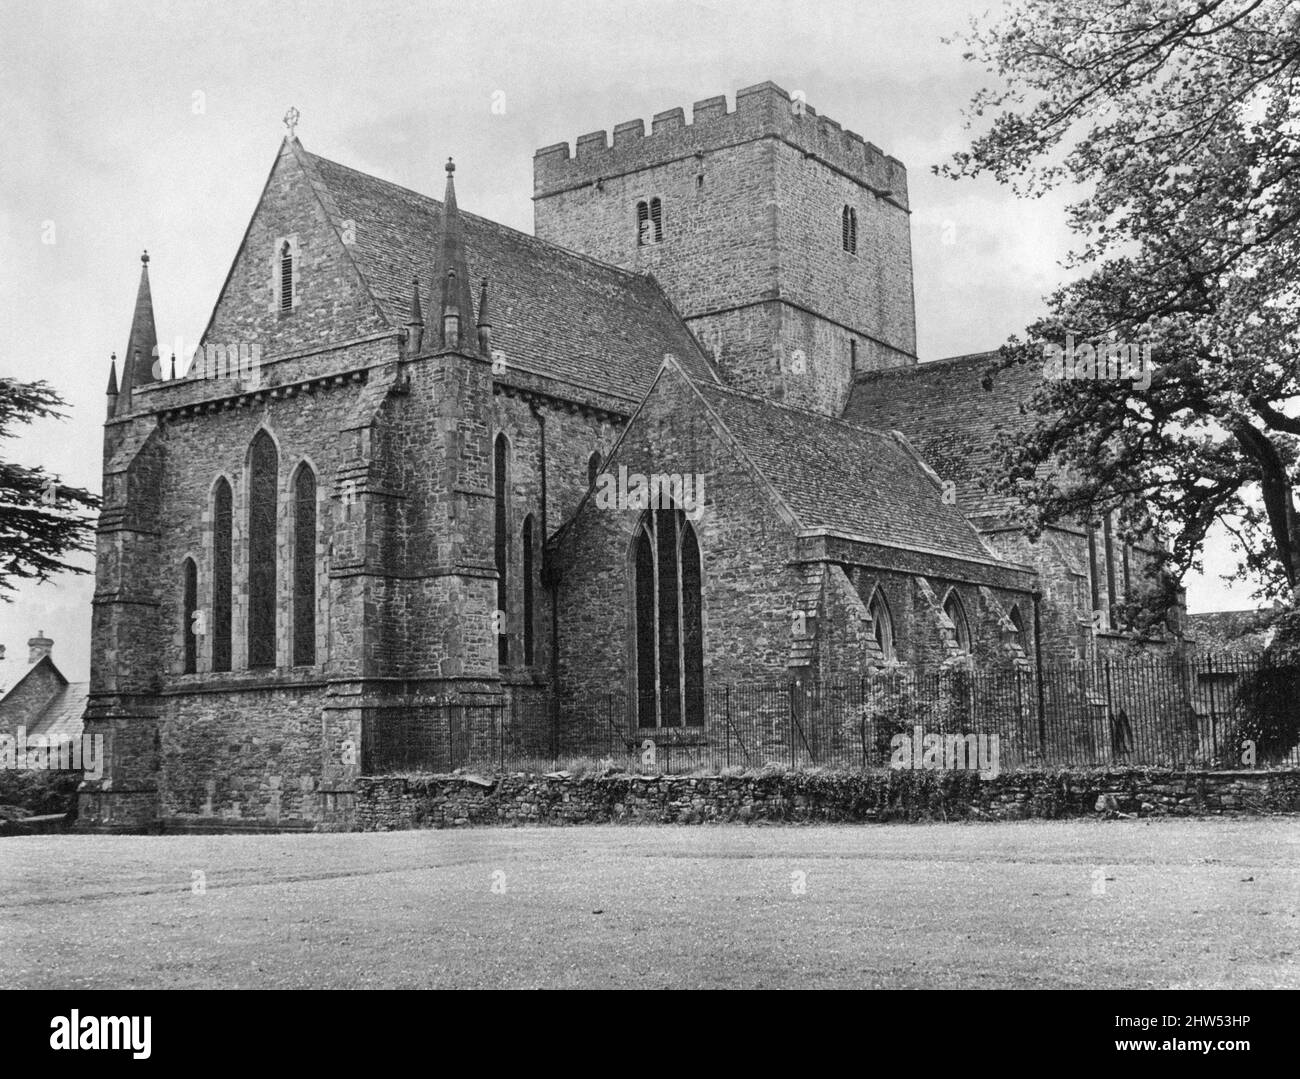 Brecon Cathedral, Brecon, a market town and community in Powys, Mid Wales, 11th June 1968. Brecon Cathedral is the cathedral of the Diocese of Swansea and Brecon in the Church in Wales and seat of the Bishop of Swansea and Brecon. Stock Photo